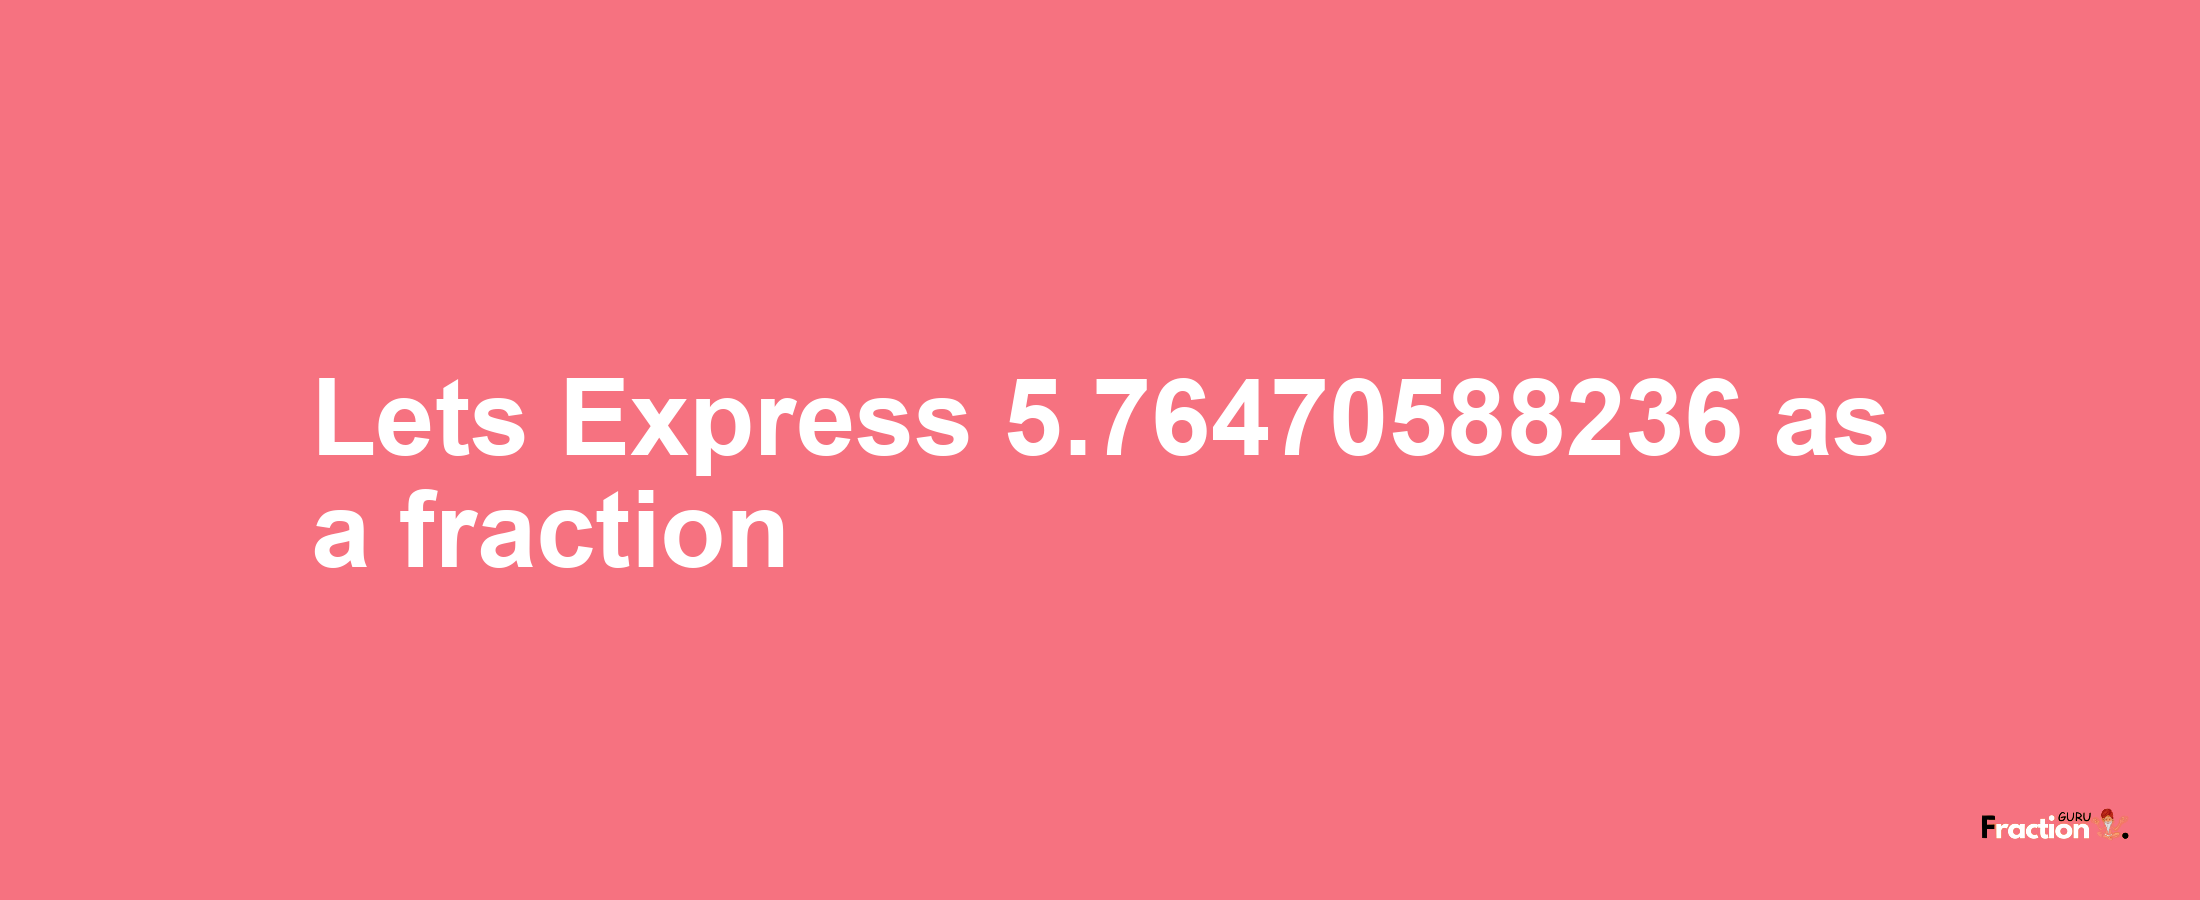 Lets Express 5.76470588236 as afraction